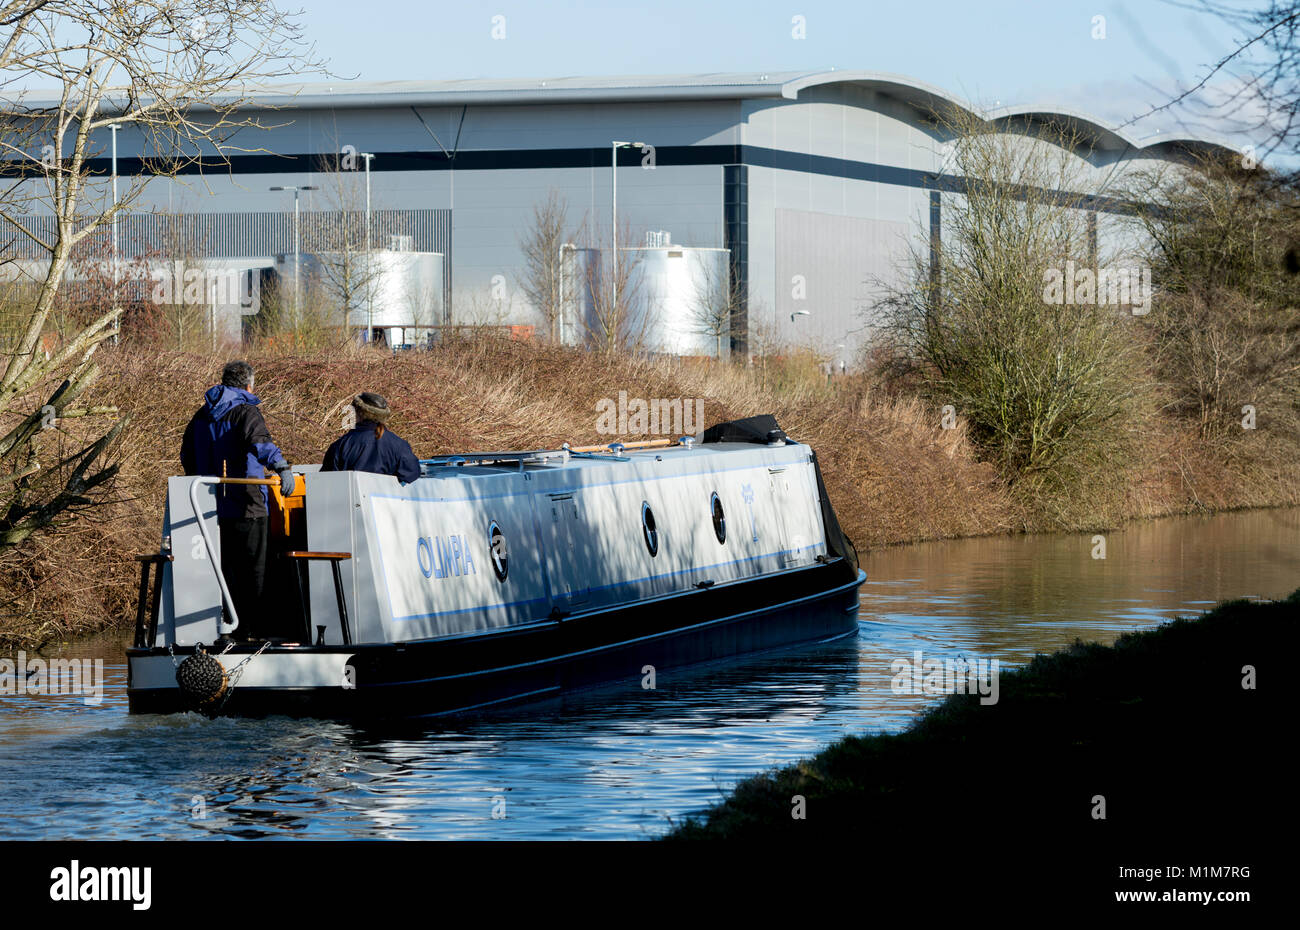 A narrowboat in winter on the Oxford Canal with warehouses behind, Banbury, Oxfordshire, England, UK Stock Photo